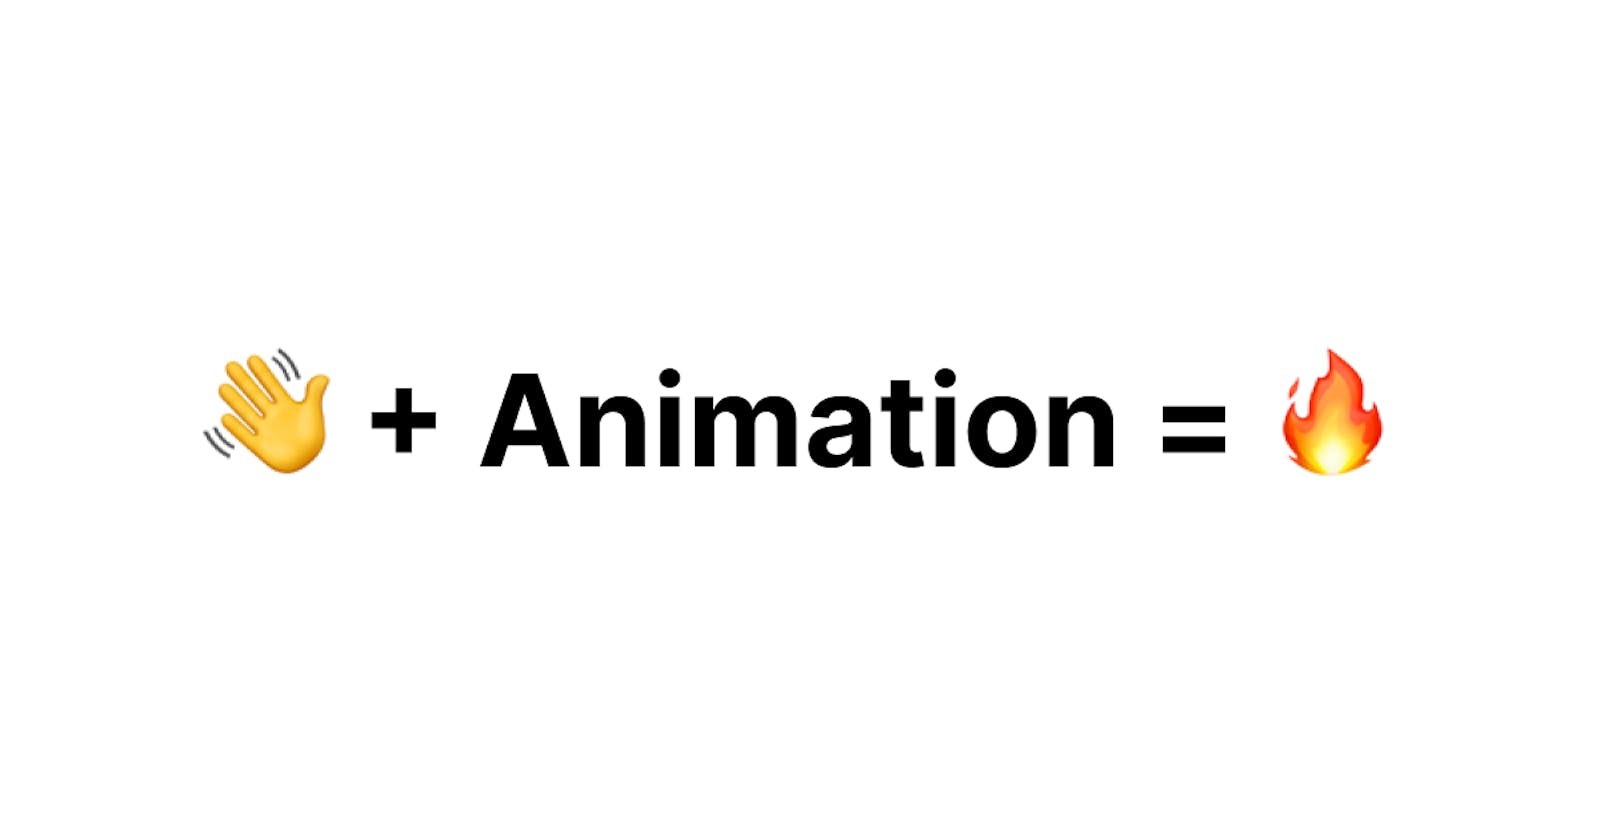 Animation can make wave 👋 much more than emoji!